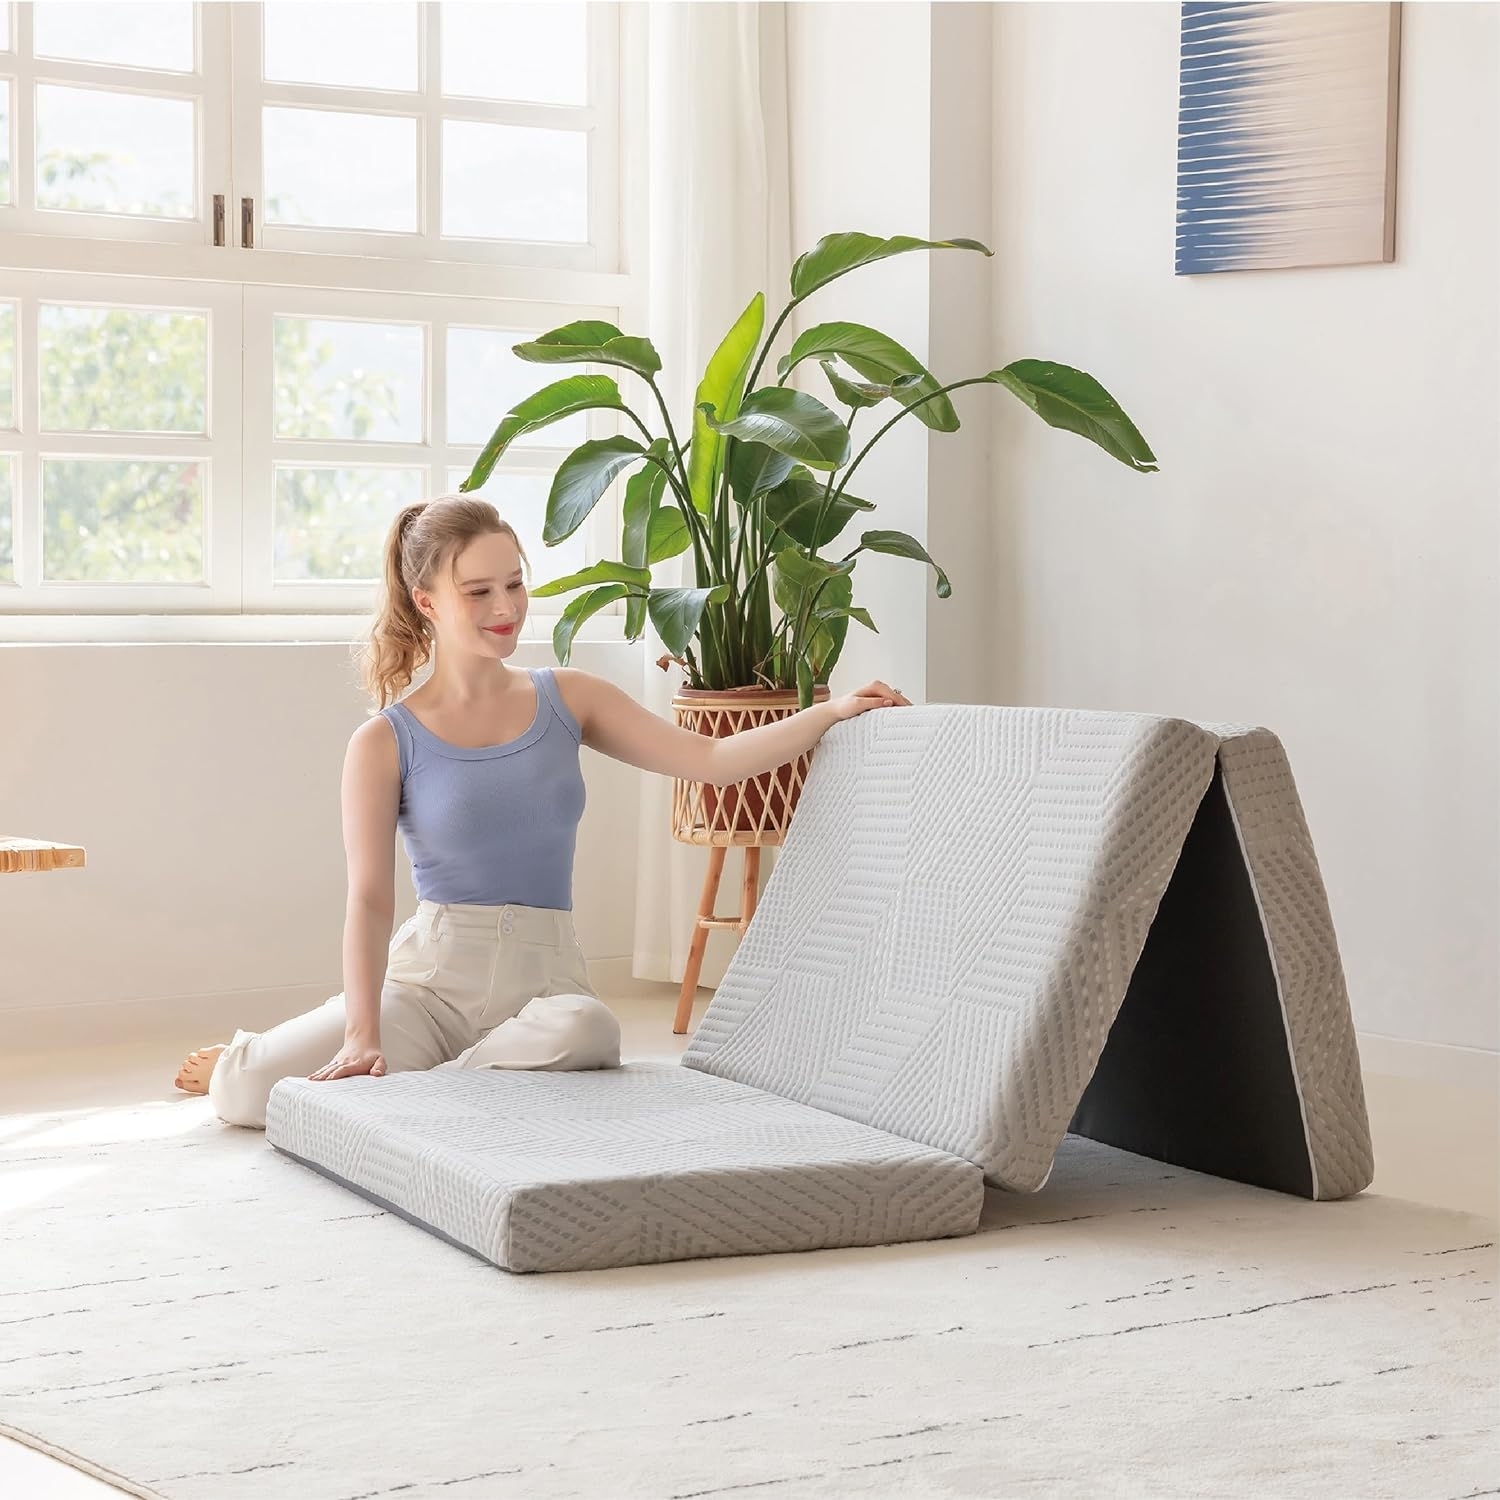 Woman sitting next to an open, foldable mattress, suitable for compact living spaces